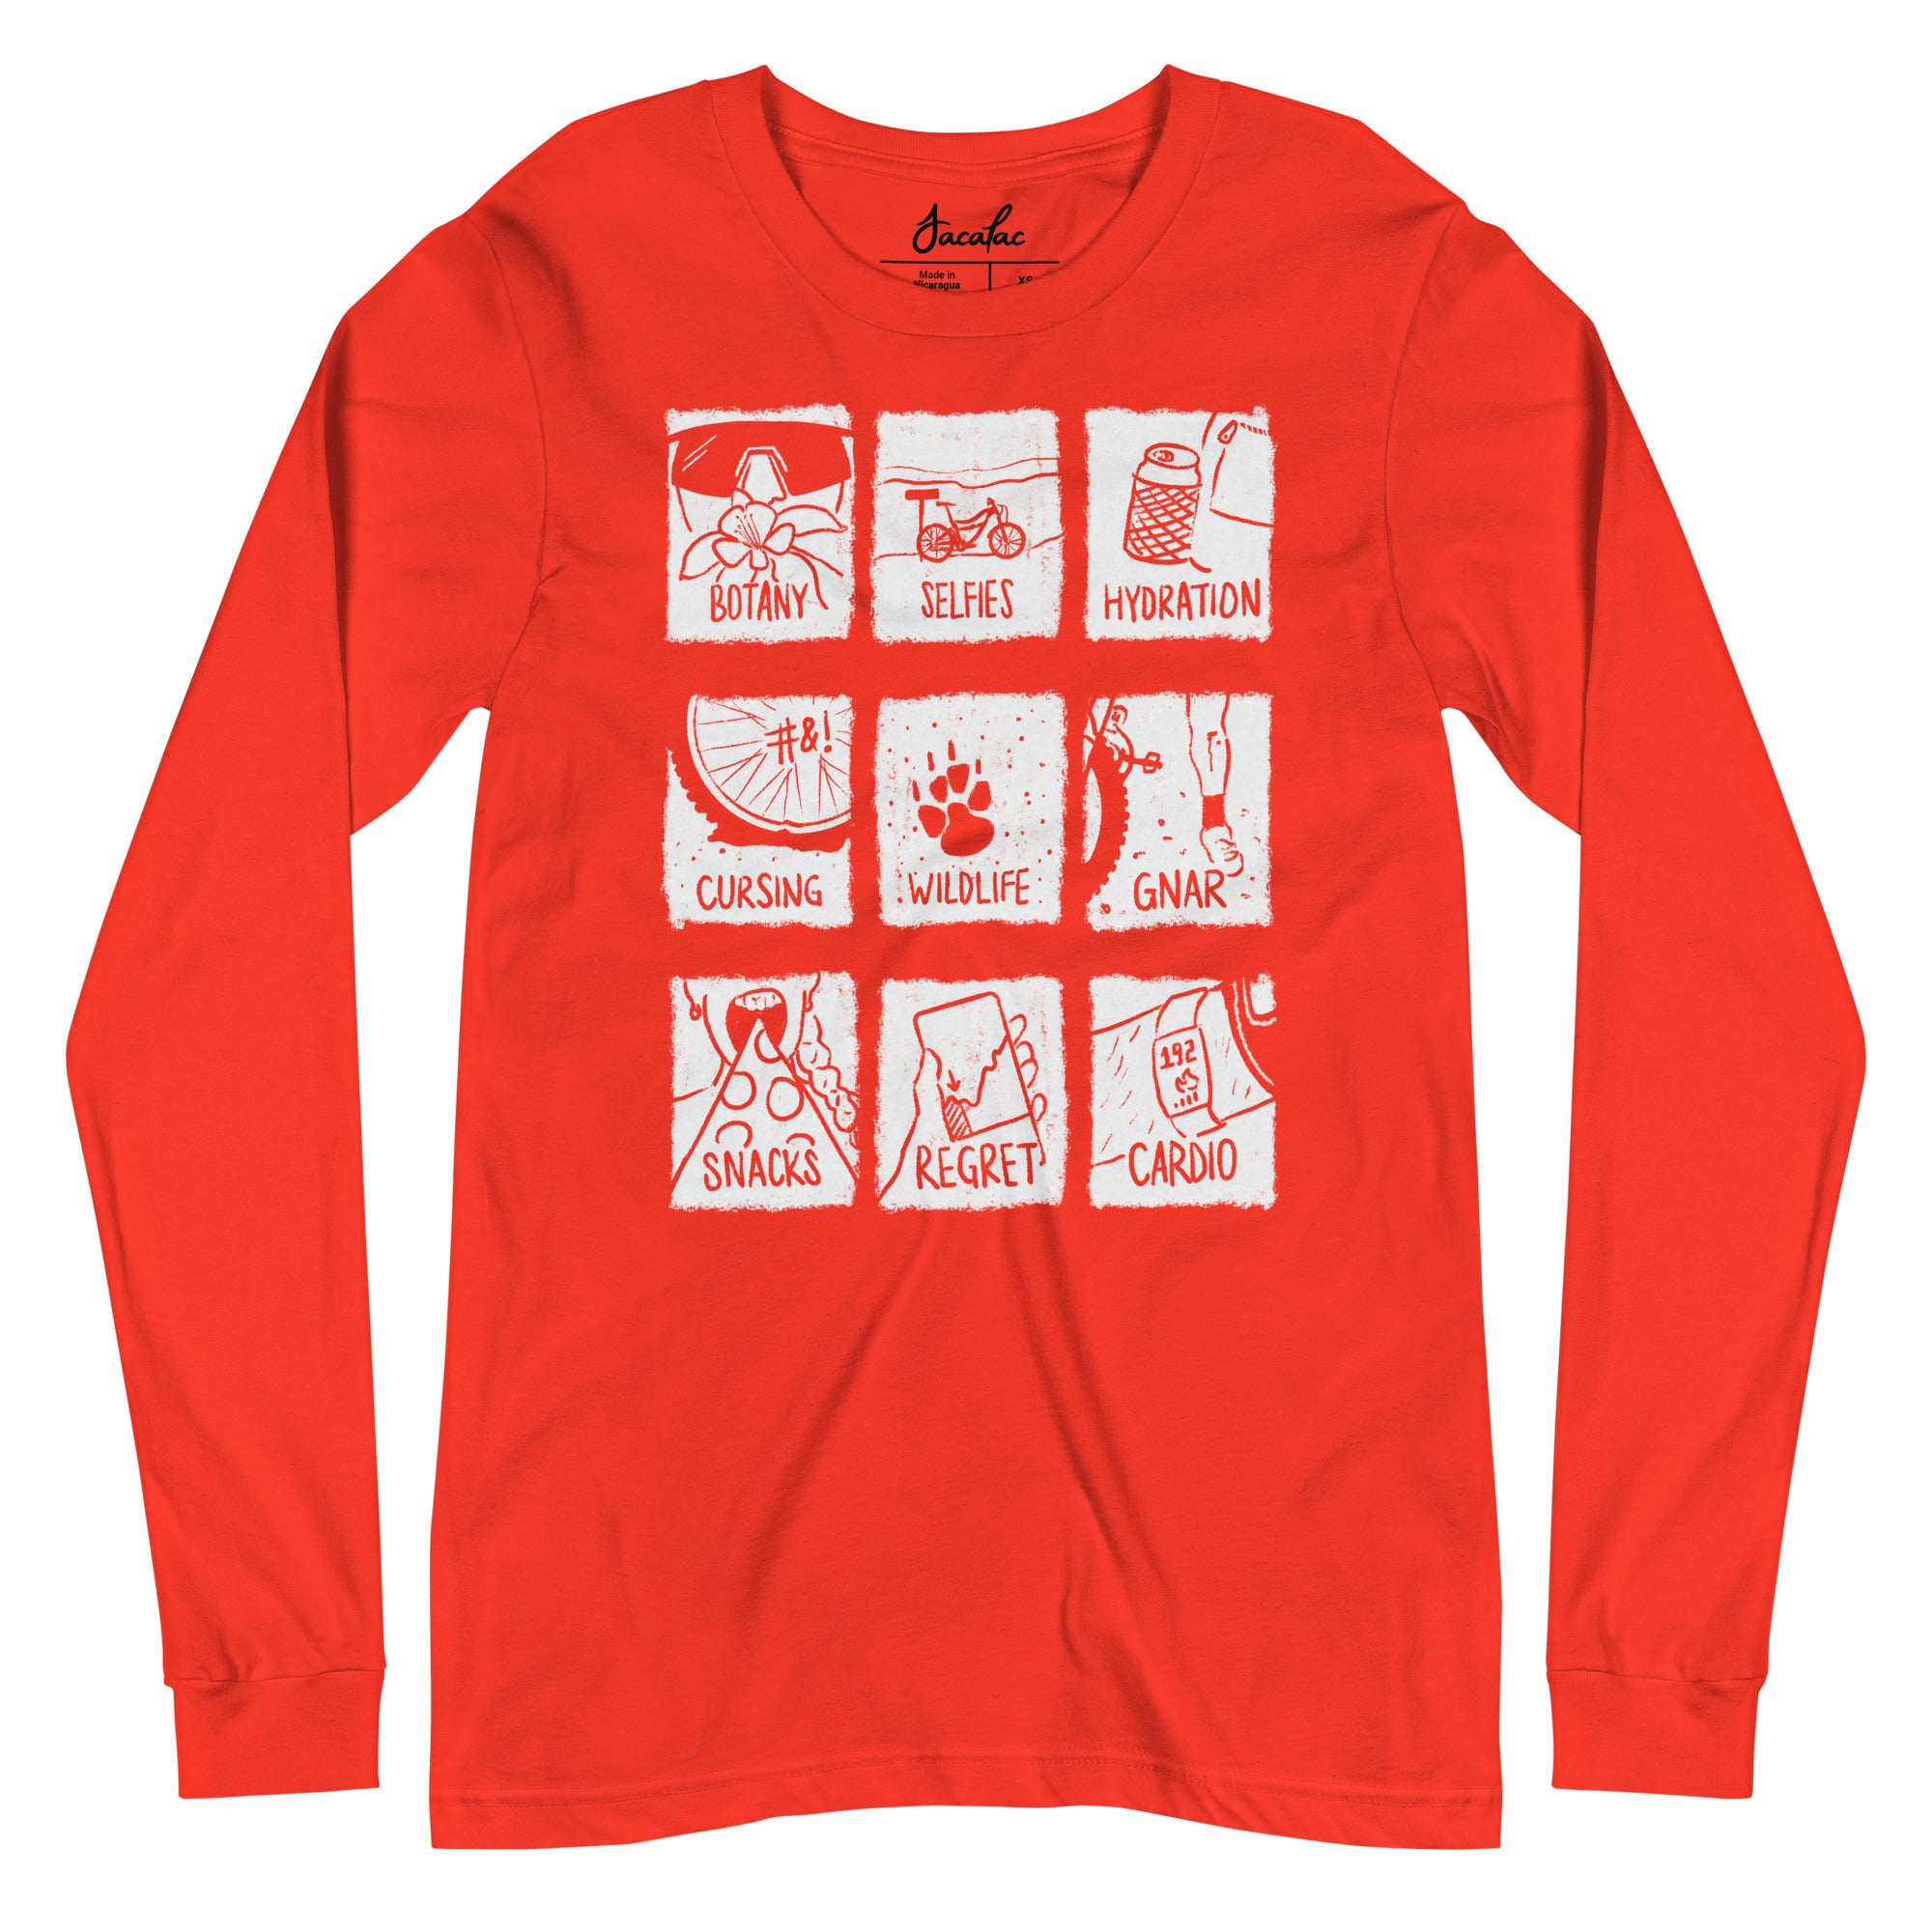 MTB Highs (and Lows) Long Sleeve T-shirt